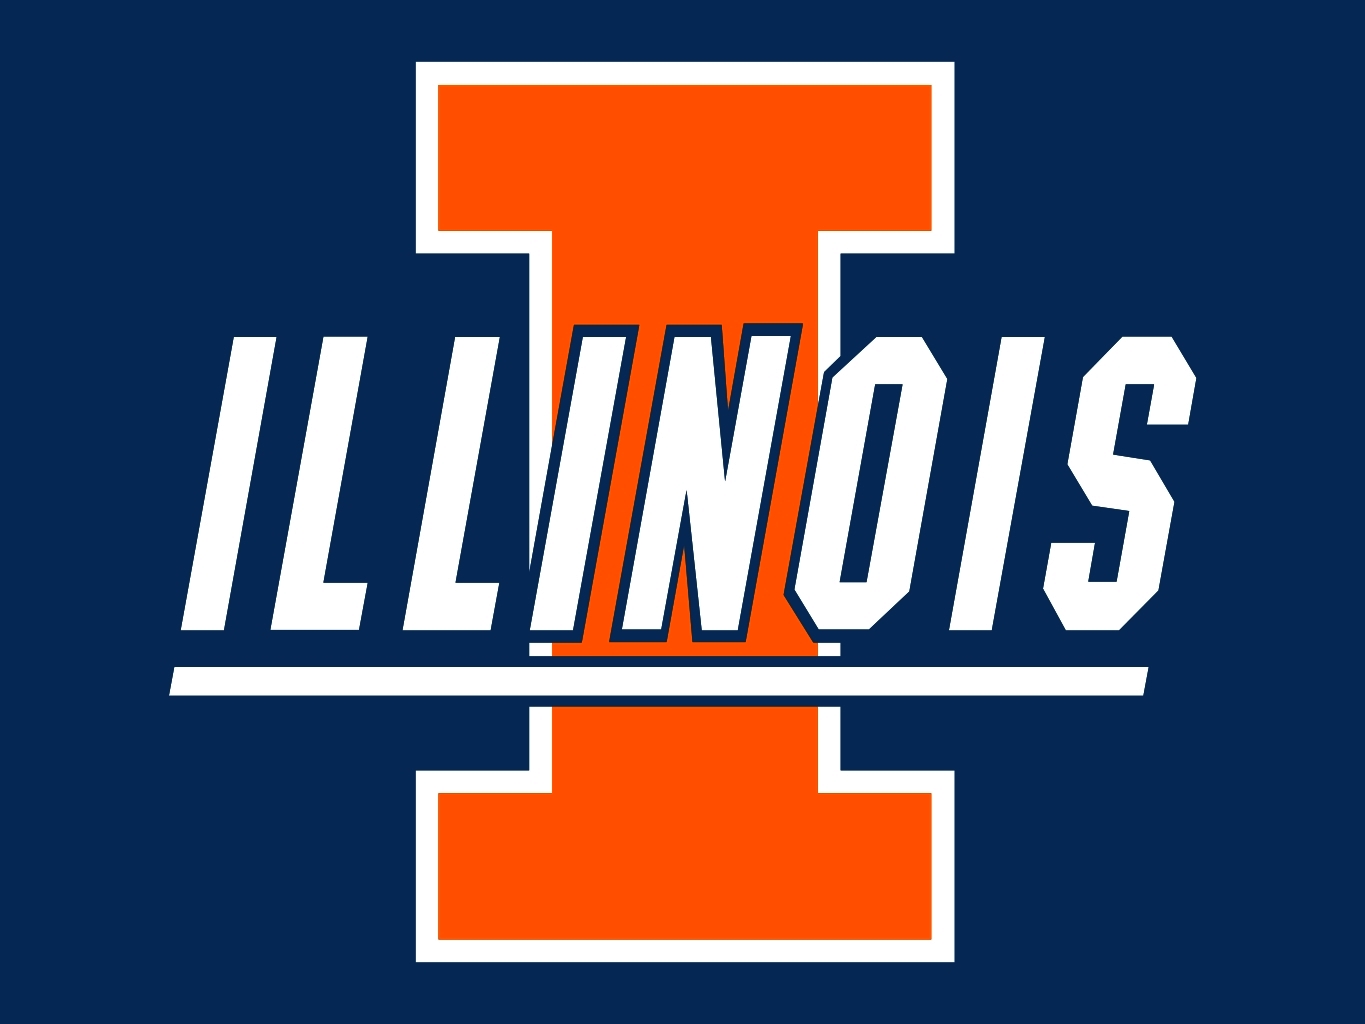 Illinois Fighting Illini Color Codes Hex, RGB, and CMYK - Team Color Codes